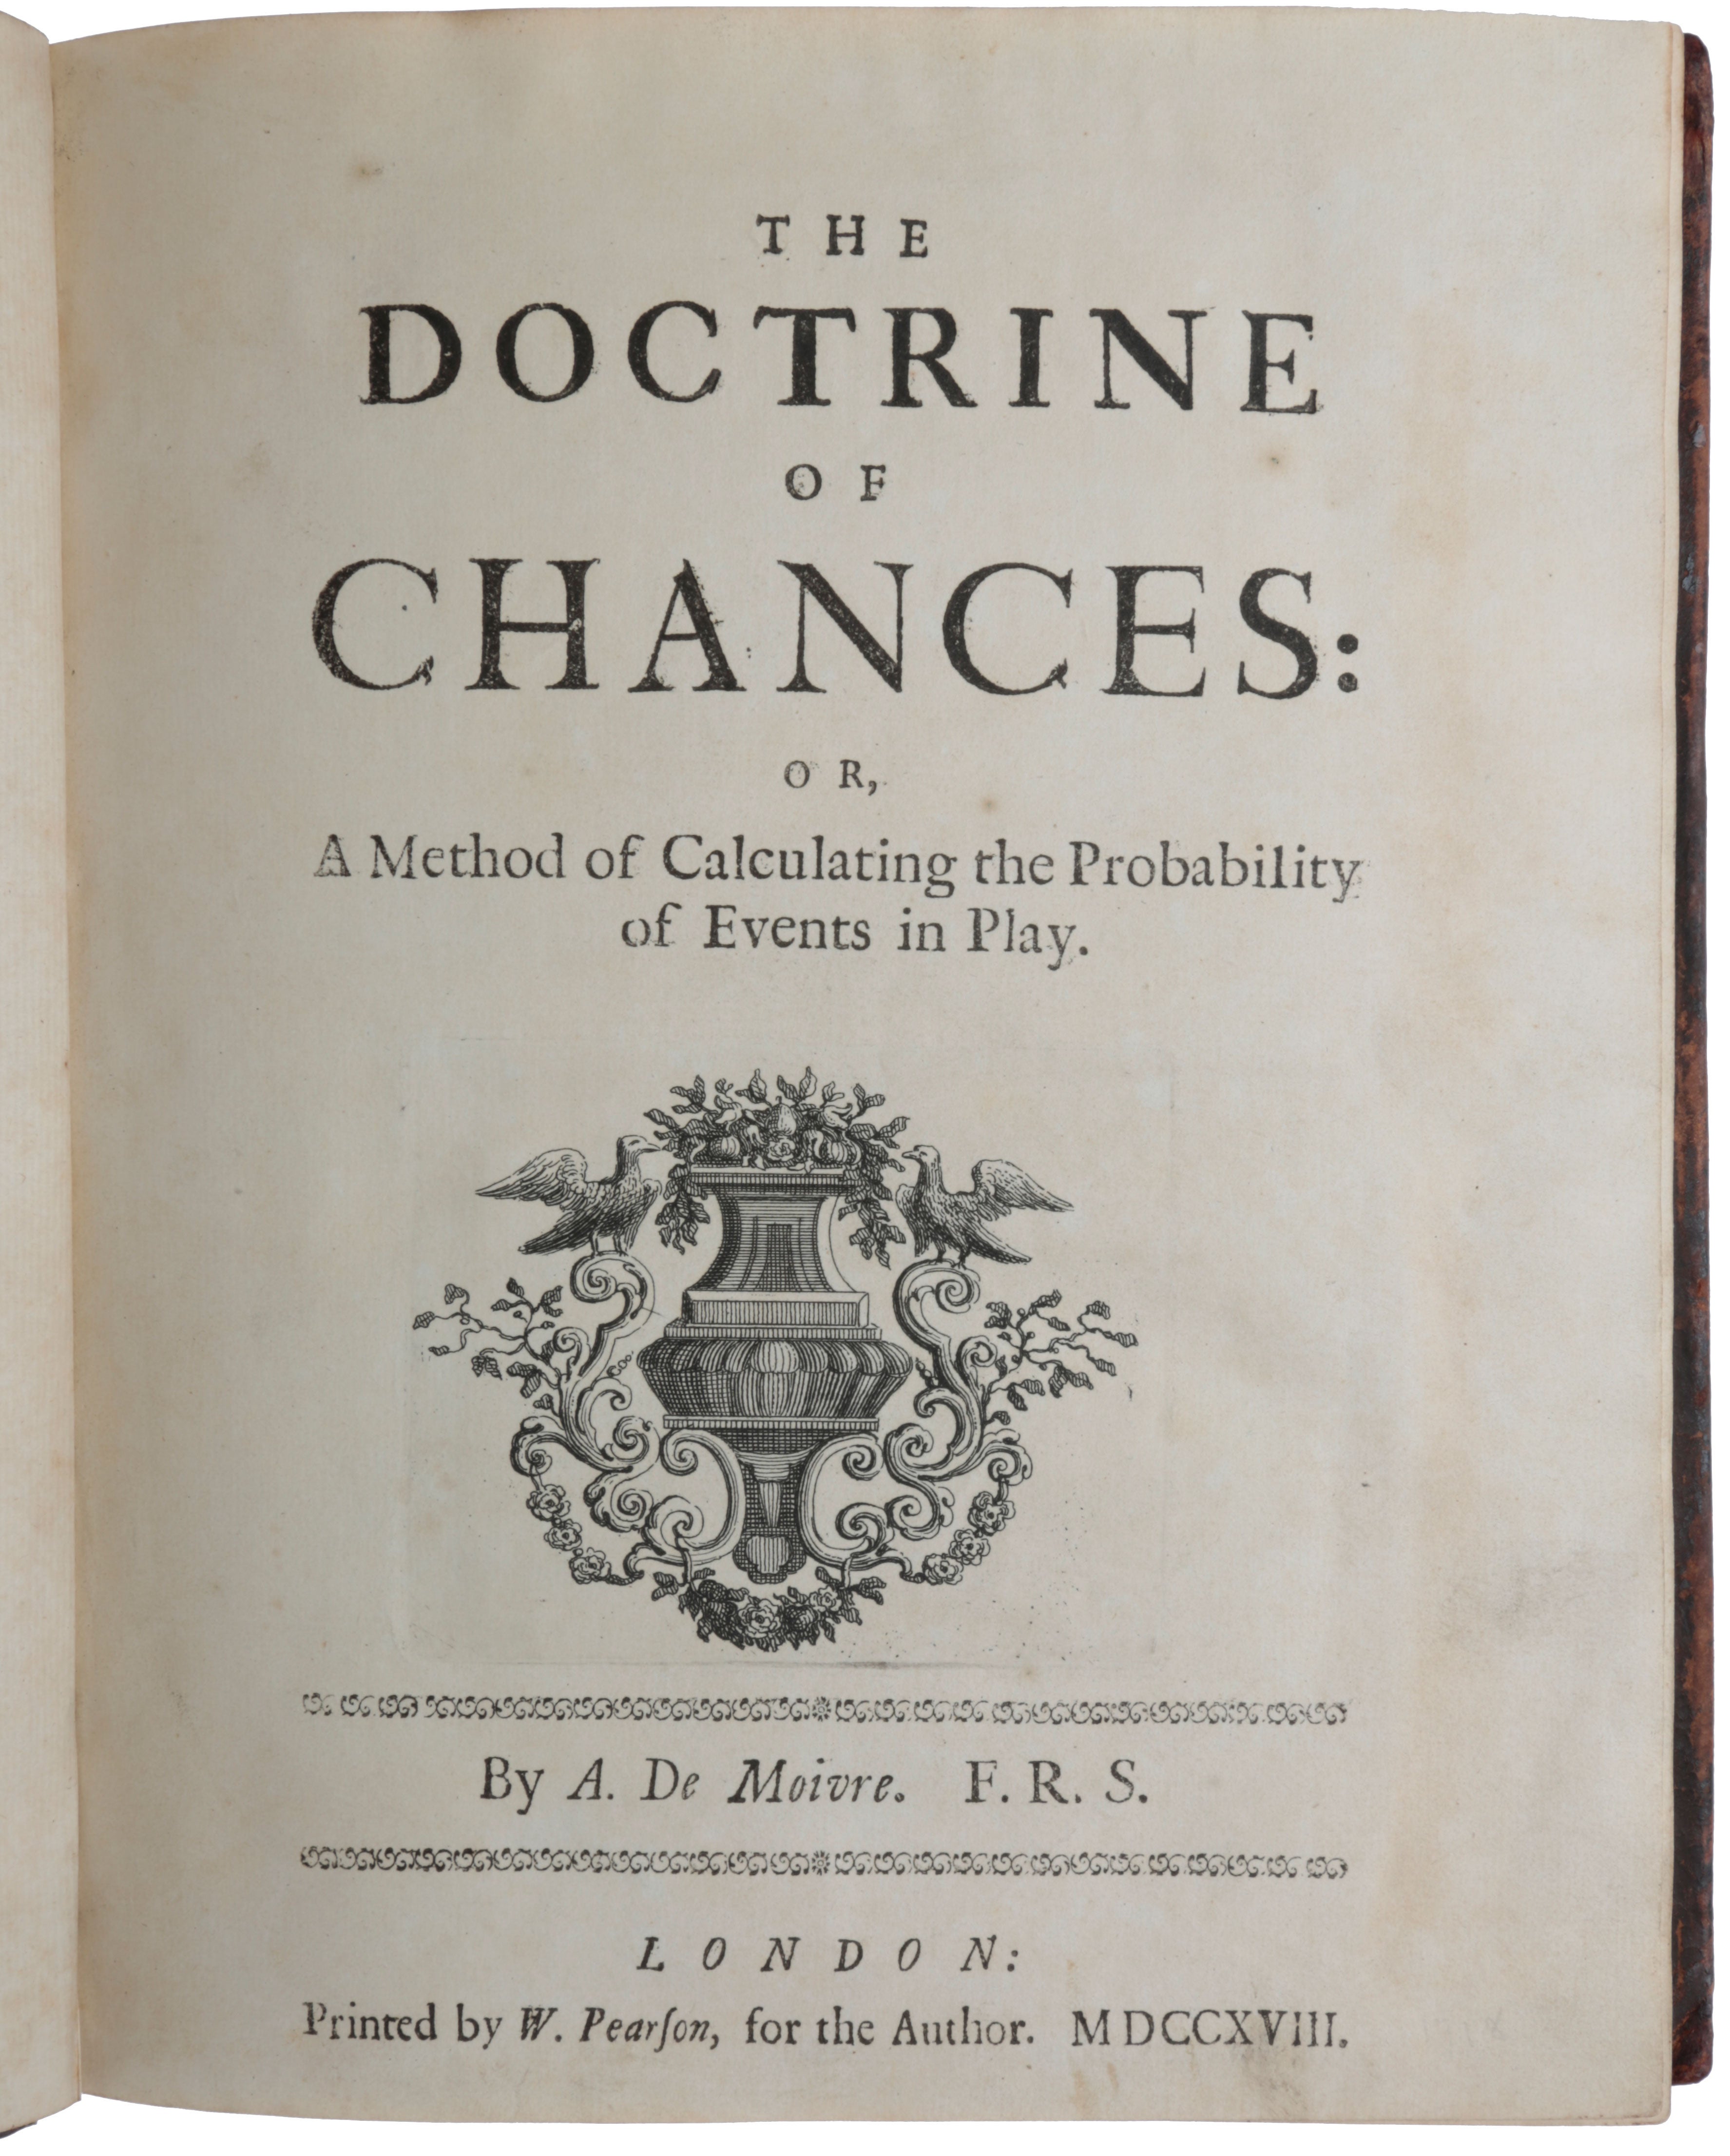 Item #5803 The Doctrine of Chances: or, A Method of Calculating the Probability of Events in Play. Abraham de MOIVRE.